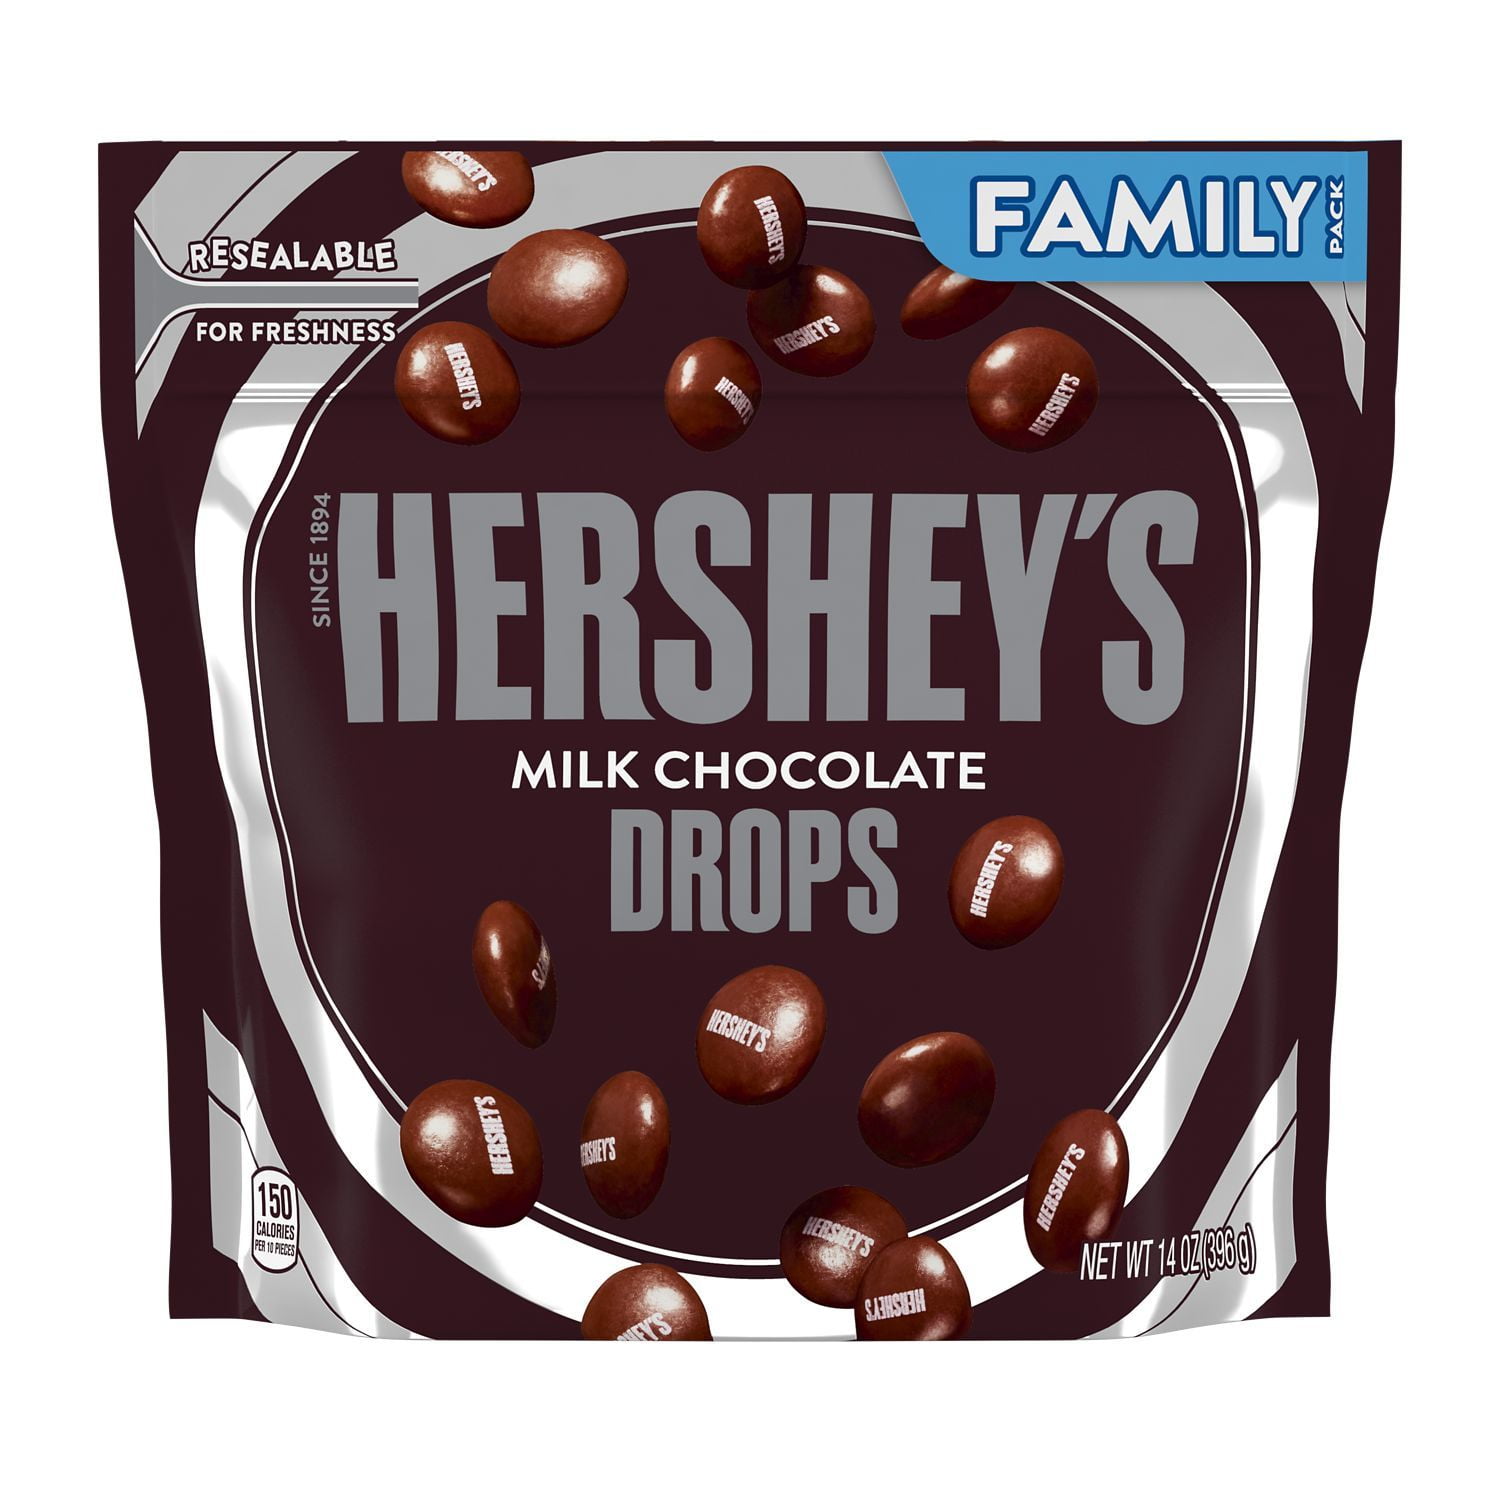 Hershey's, Milk Chocolate Drops Candy, 14 oz, Resealable Family Pack